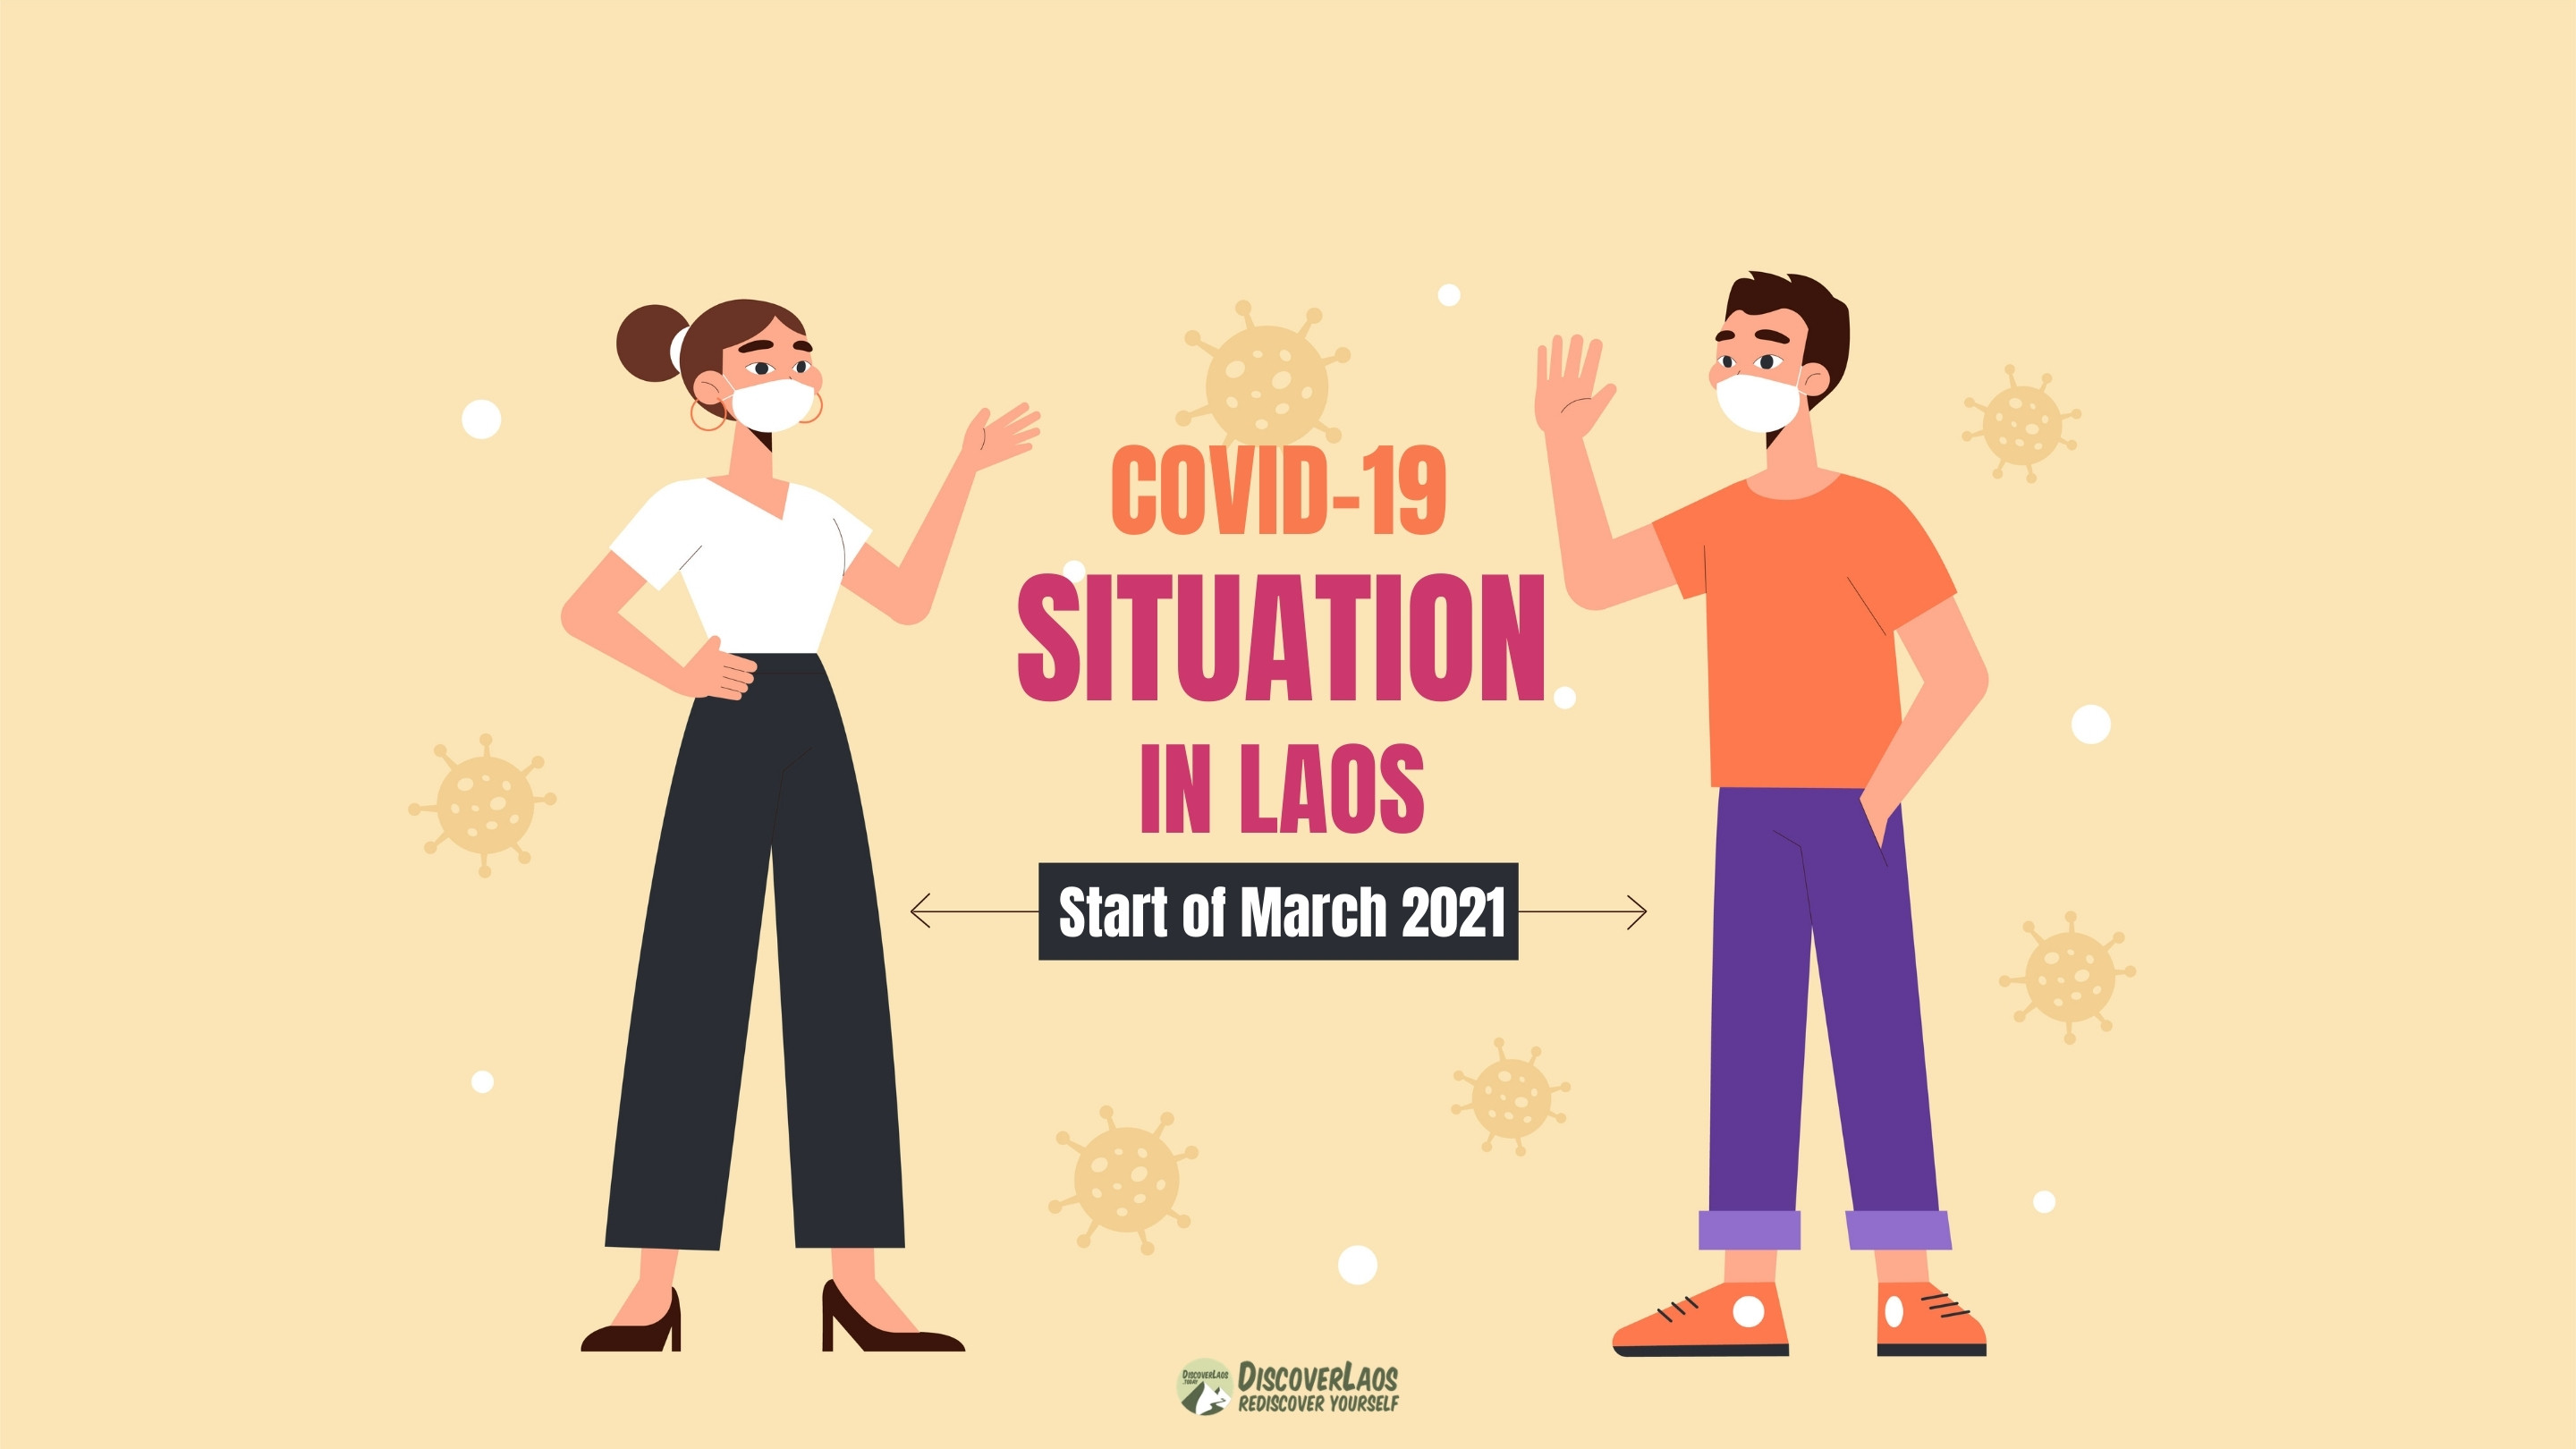 COVID Update for the start of March 2021